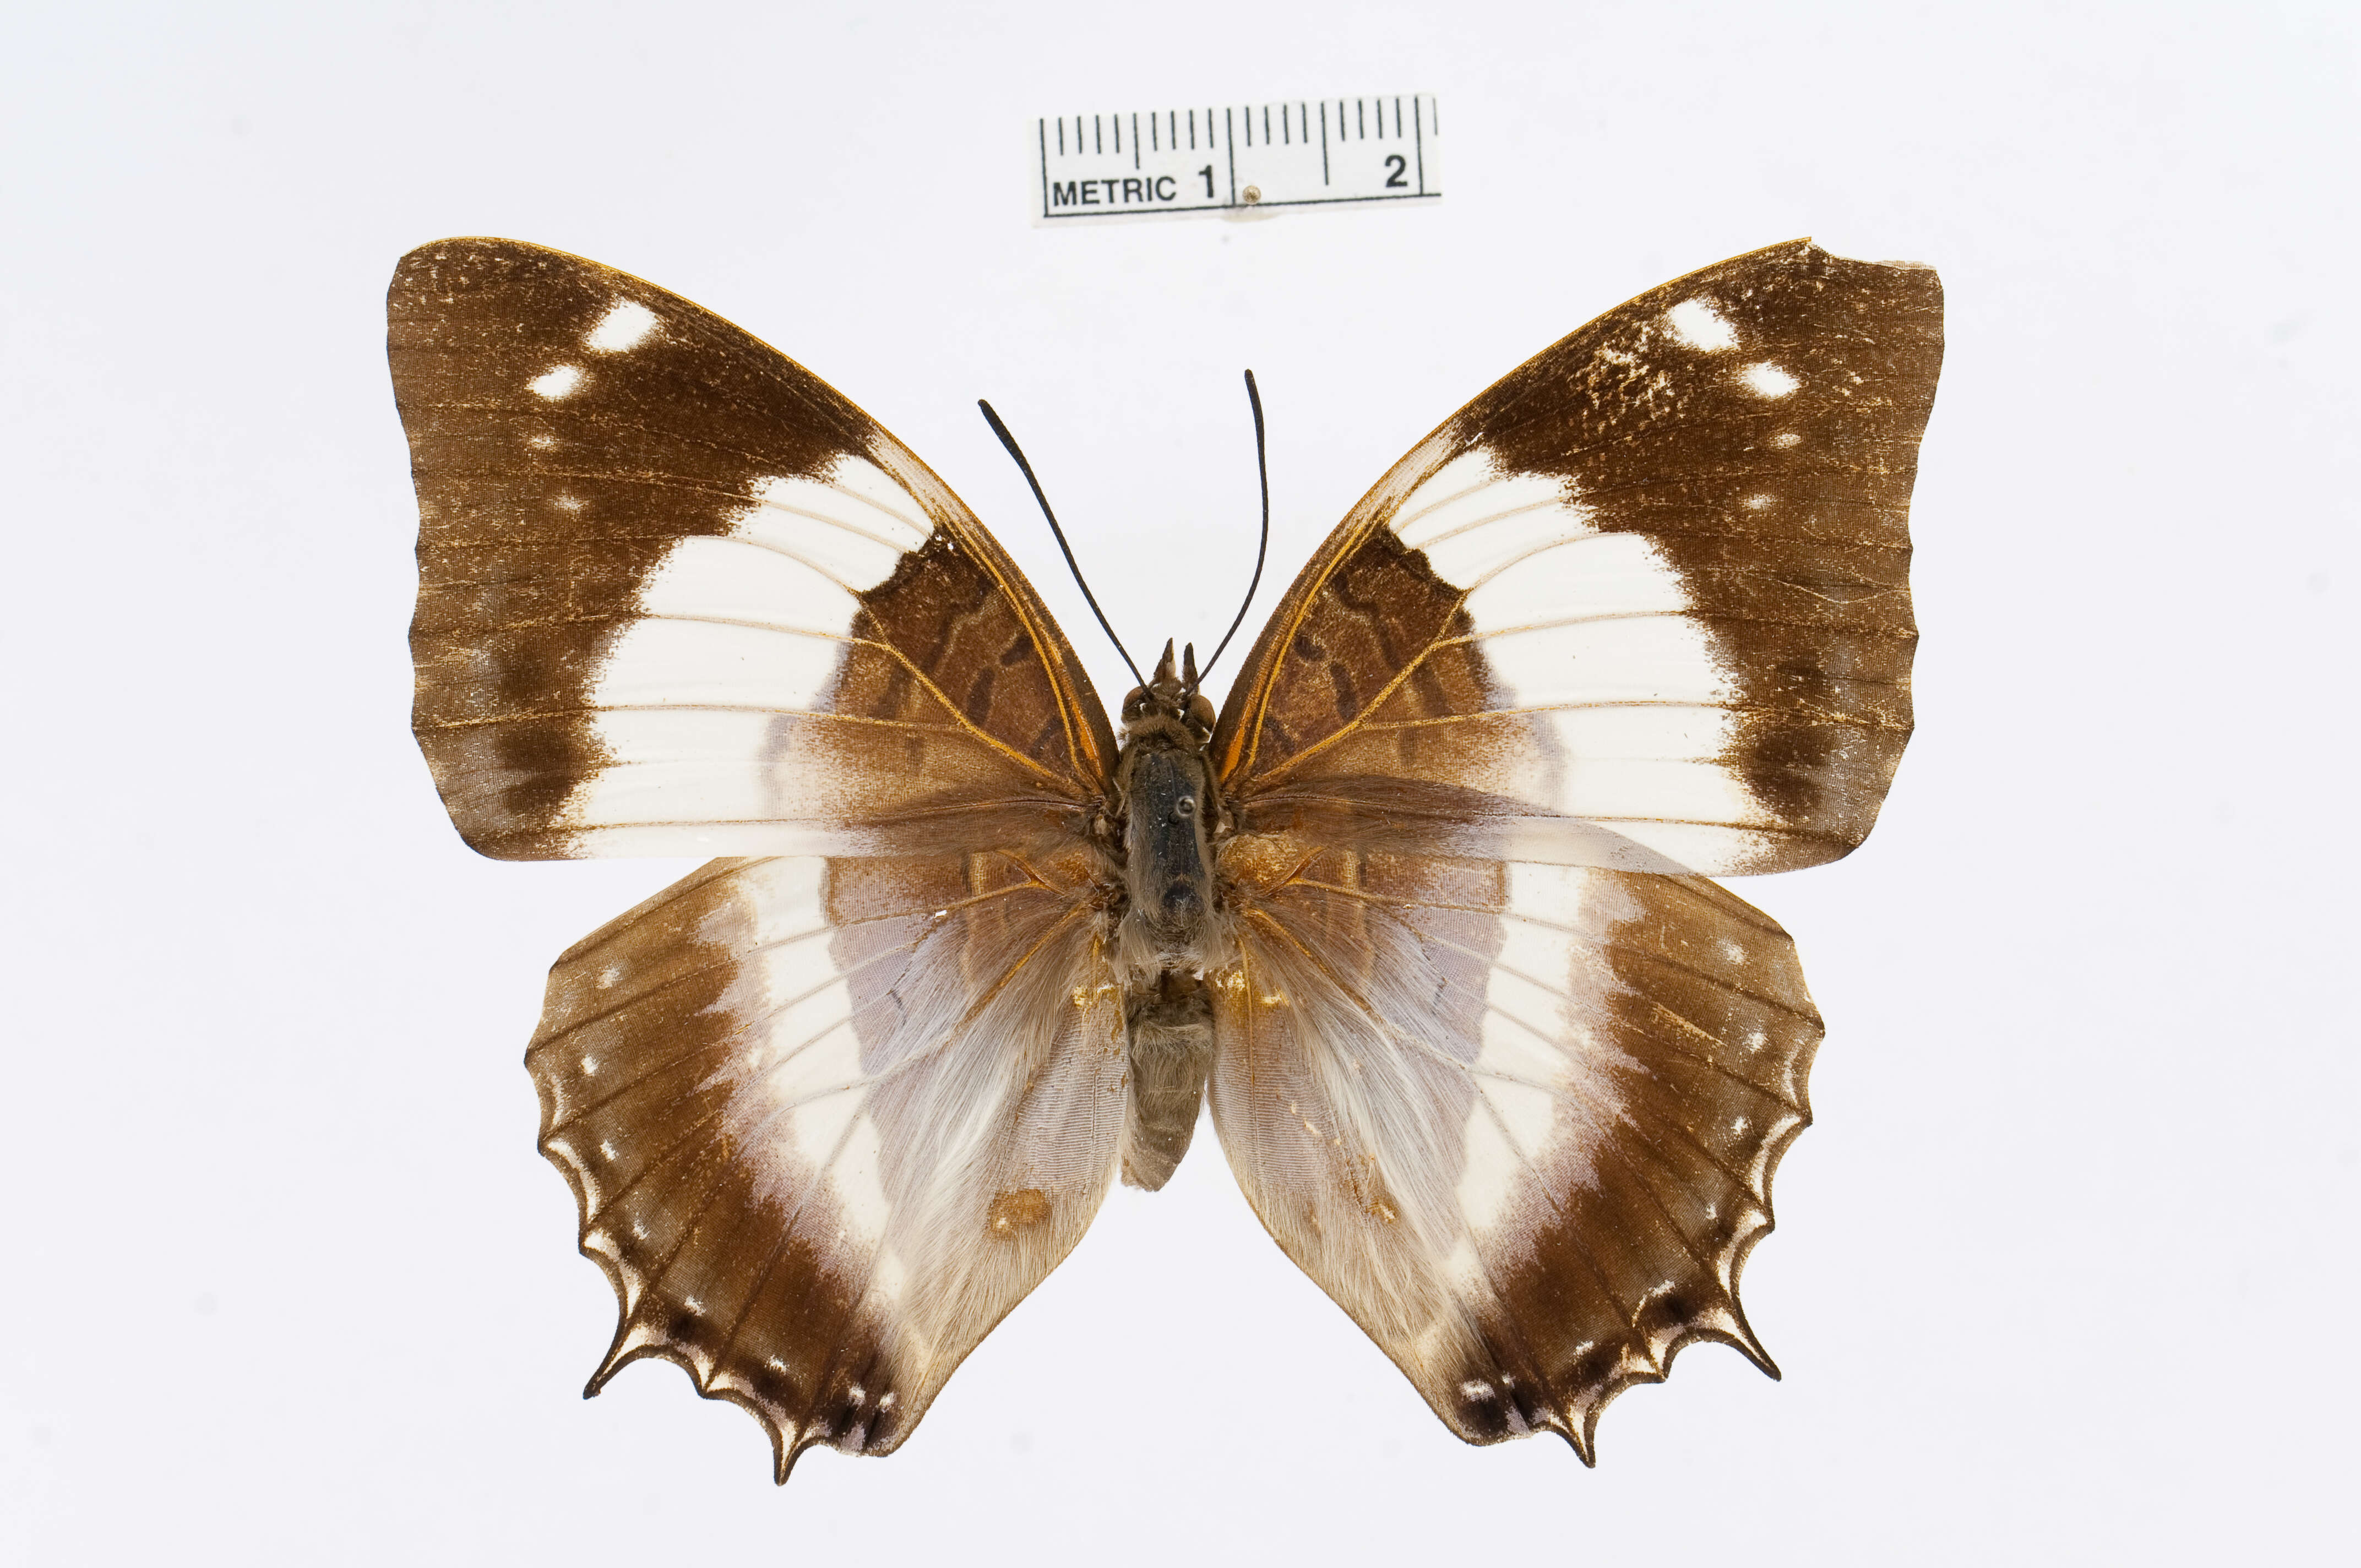 Image of Charaxes violetta Grose-Smith 1885